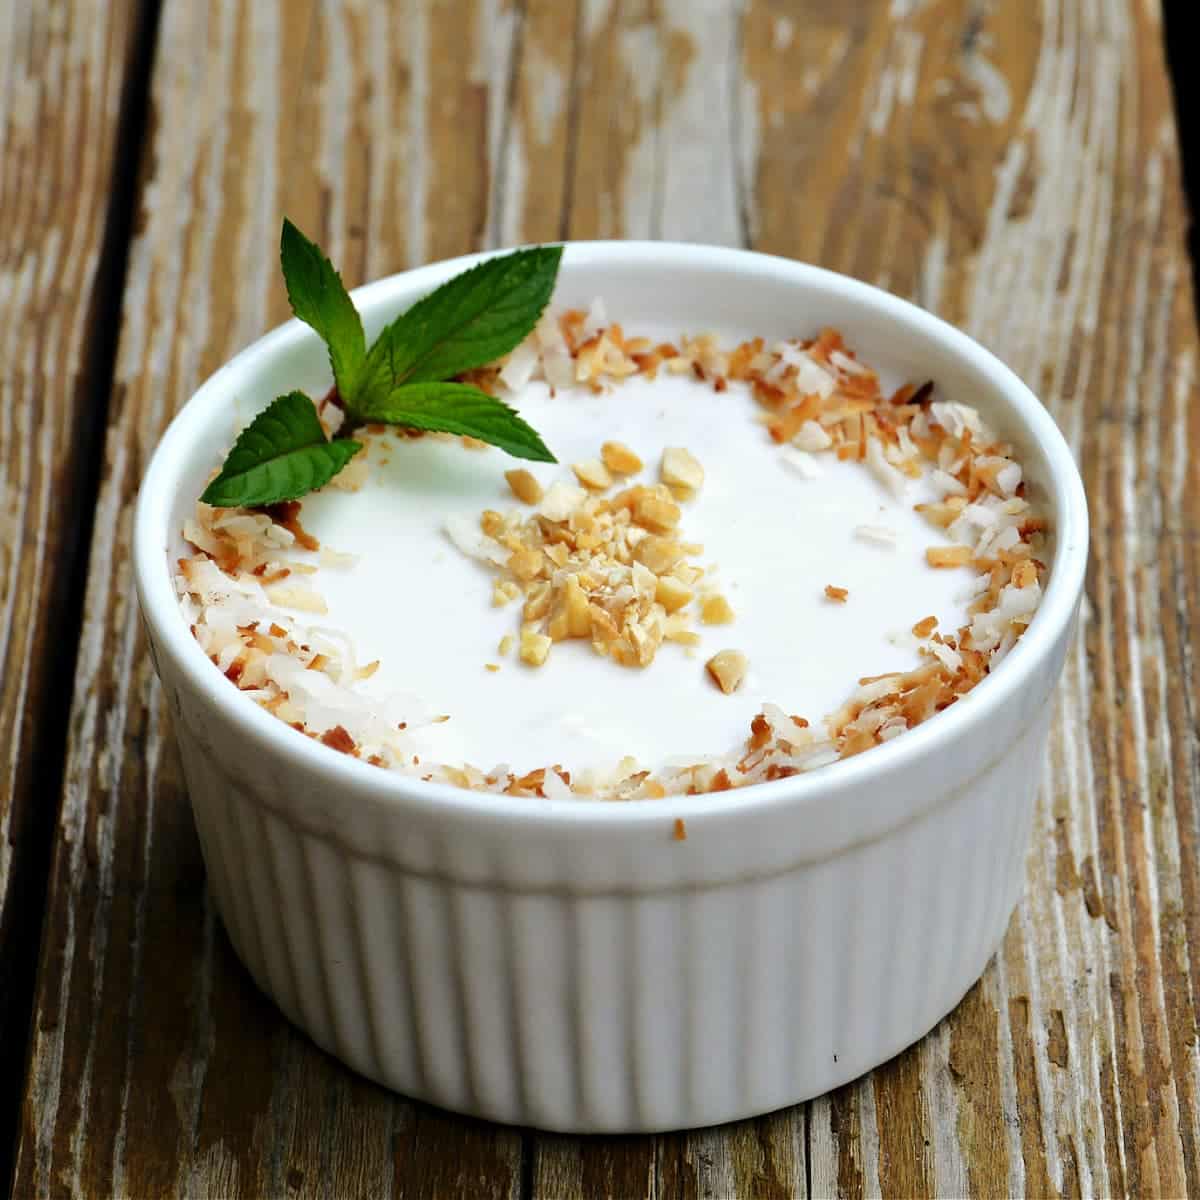 Vietnamese banana tapioca pudding in a white dessert bowl on a wooden background.